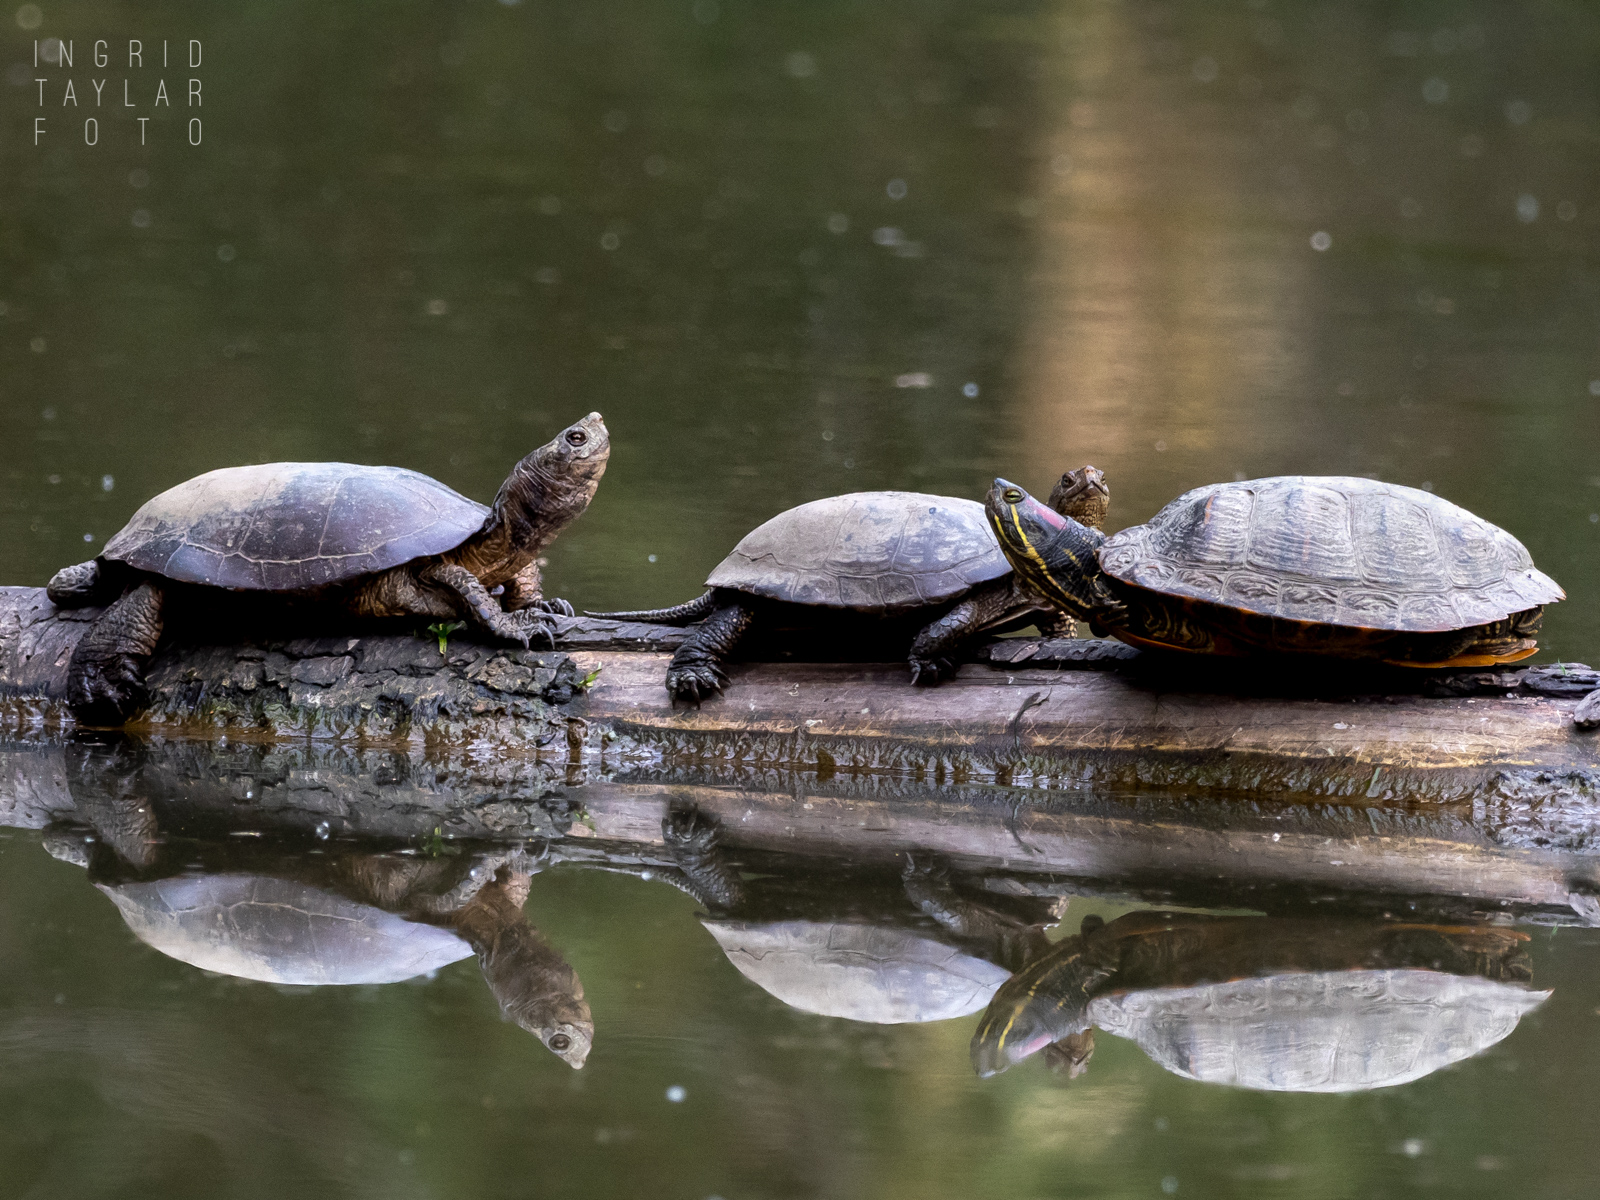 Western Pond Turtles and Red-Eared Slider